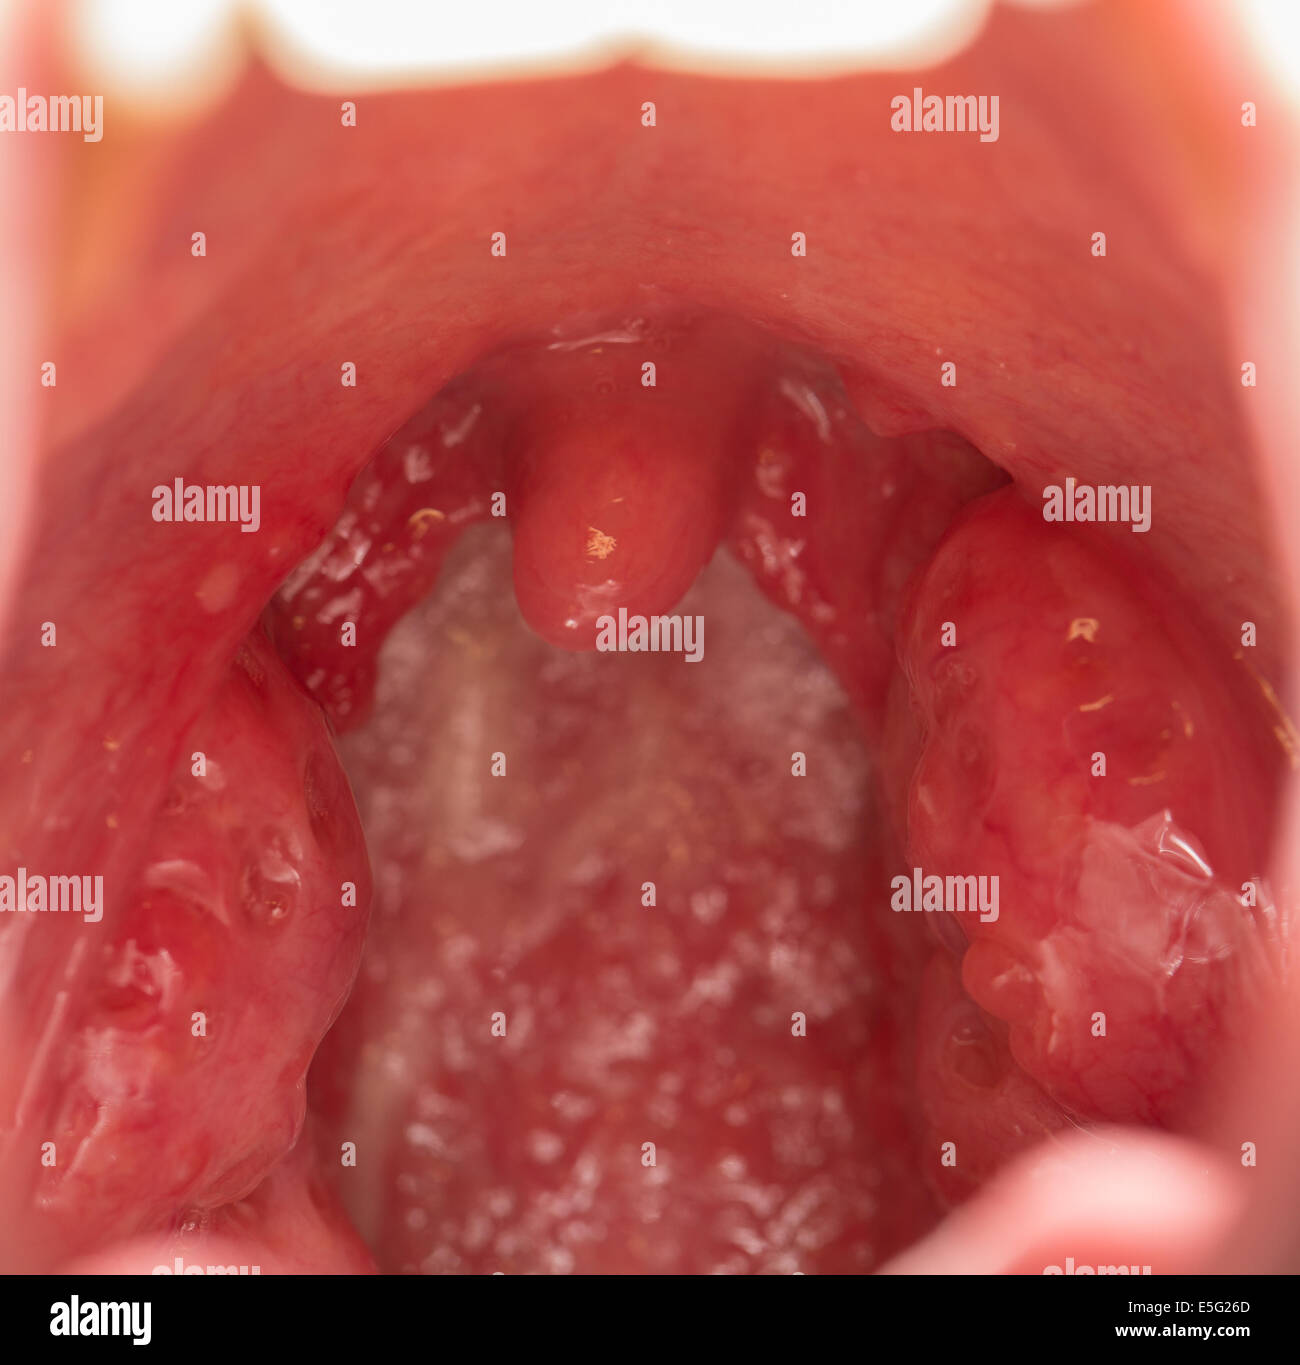 Open mouth view of tonsils Stock Photo